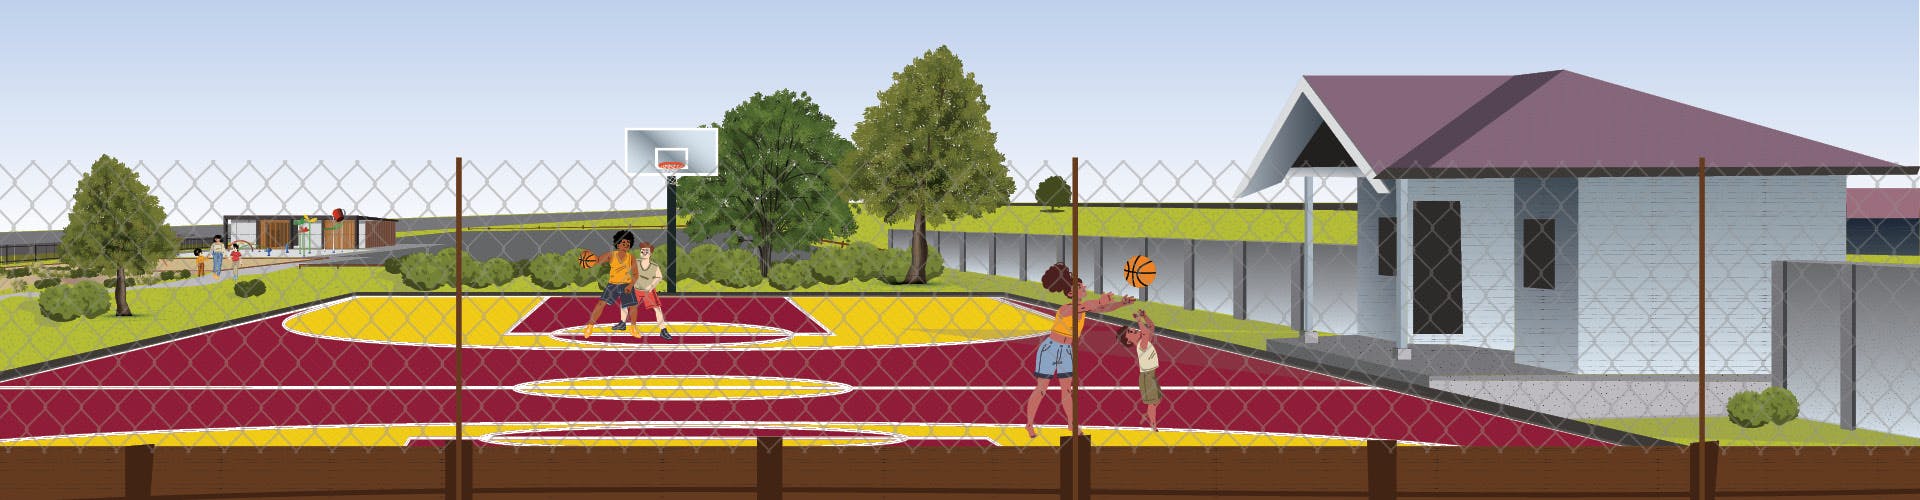 Concept drawing of Tulloch Park redevelopment shows a maroon and gold basketball court.